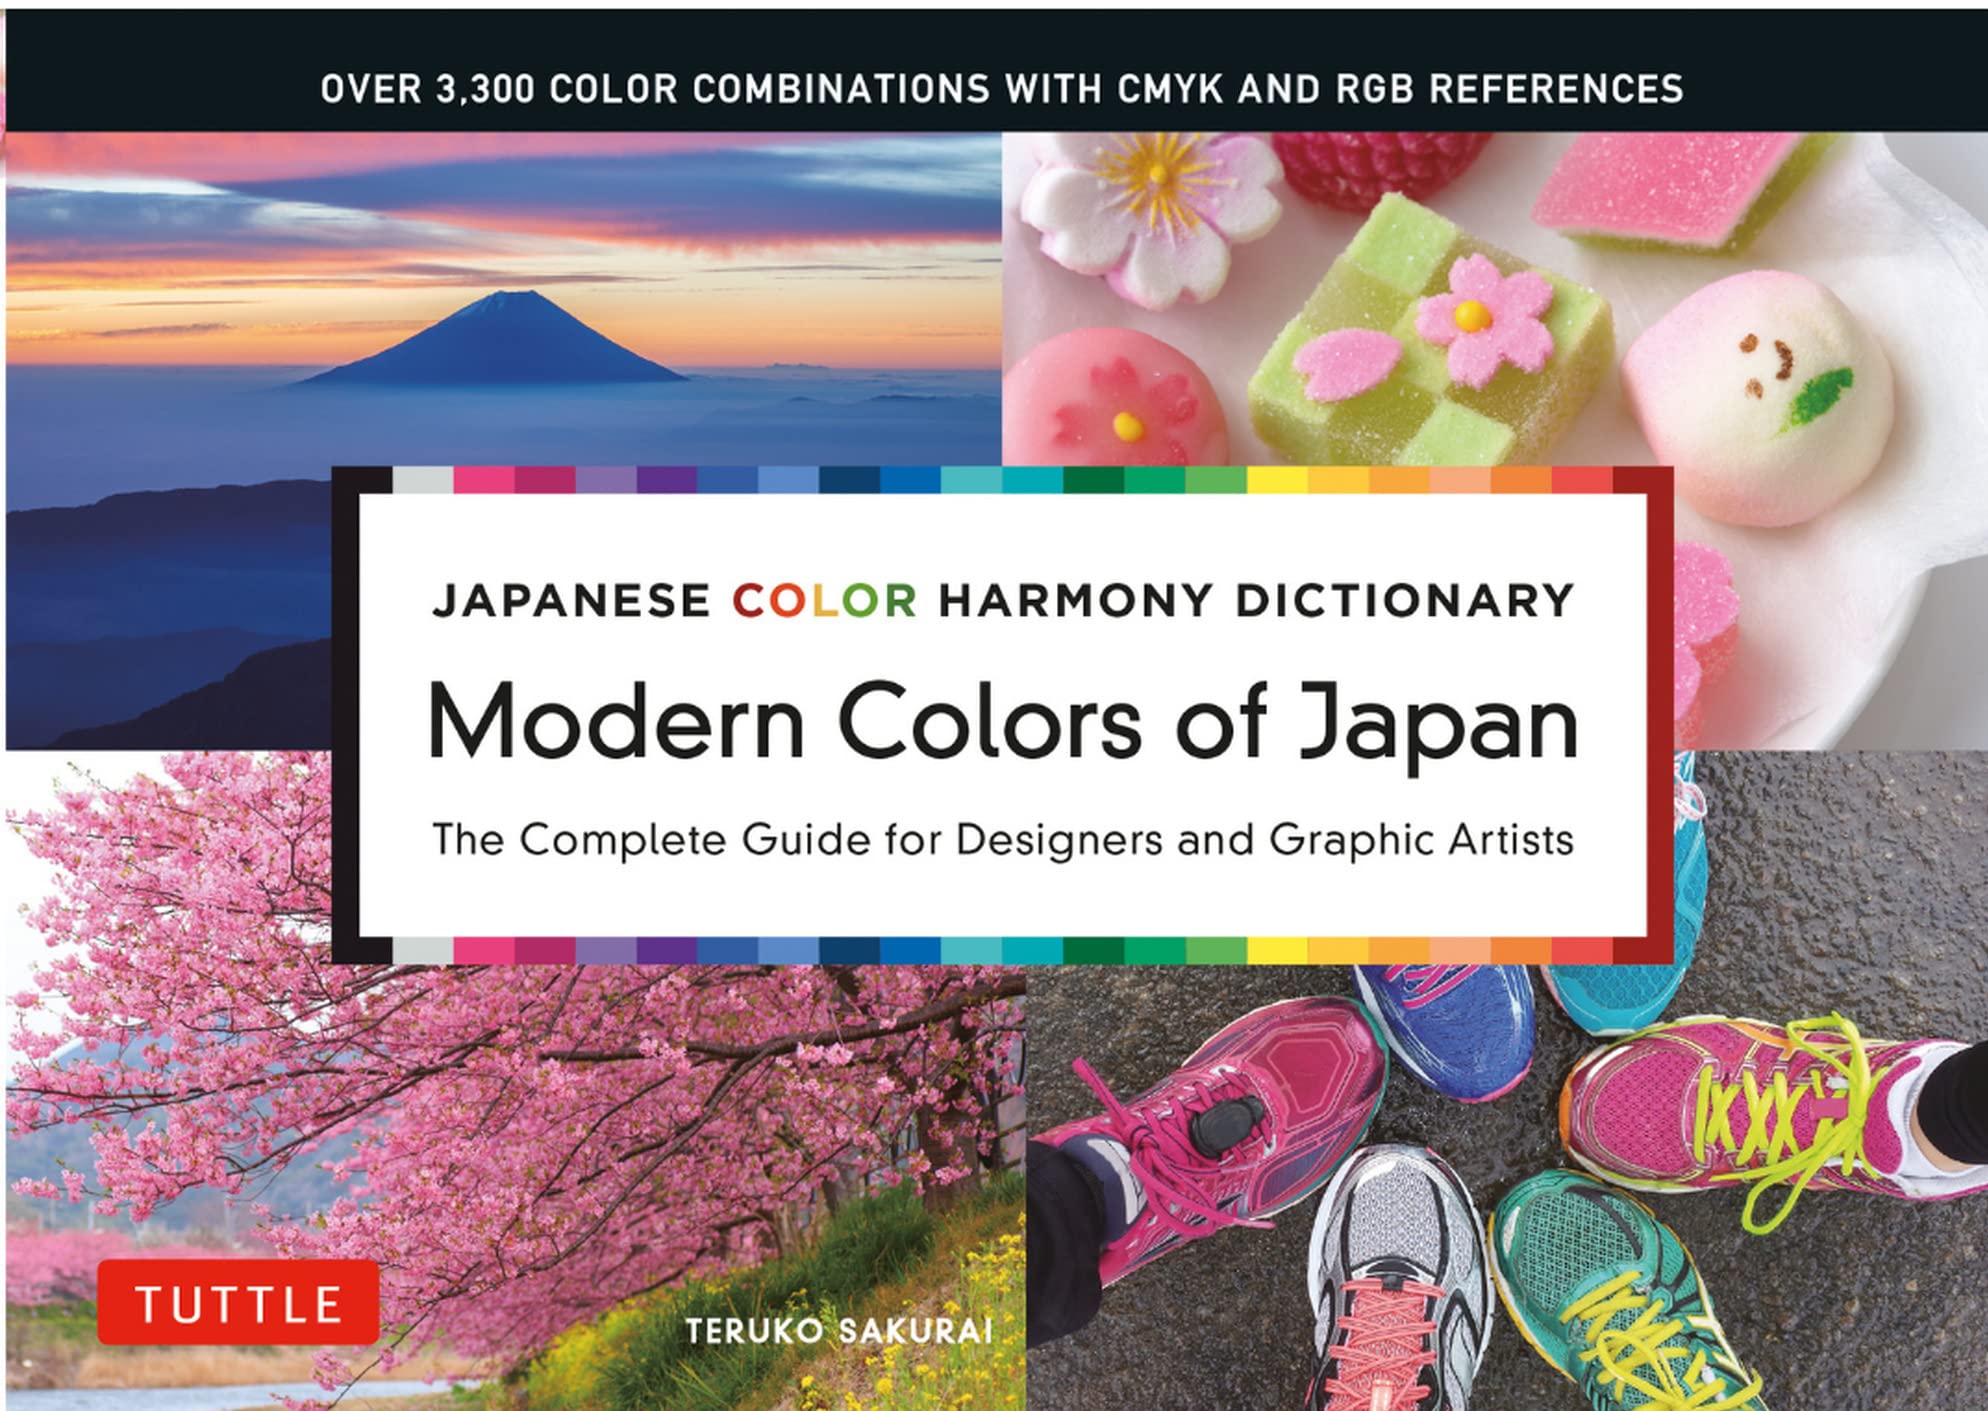 Japanese Color Harmony Dictionary - Modern Colors of Japan